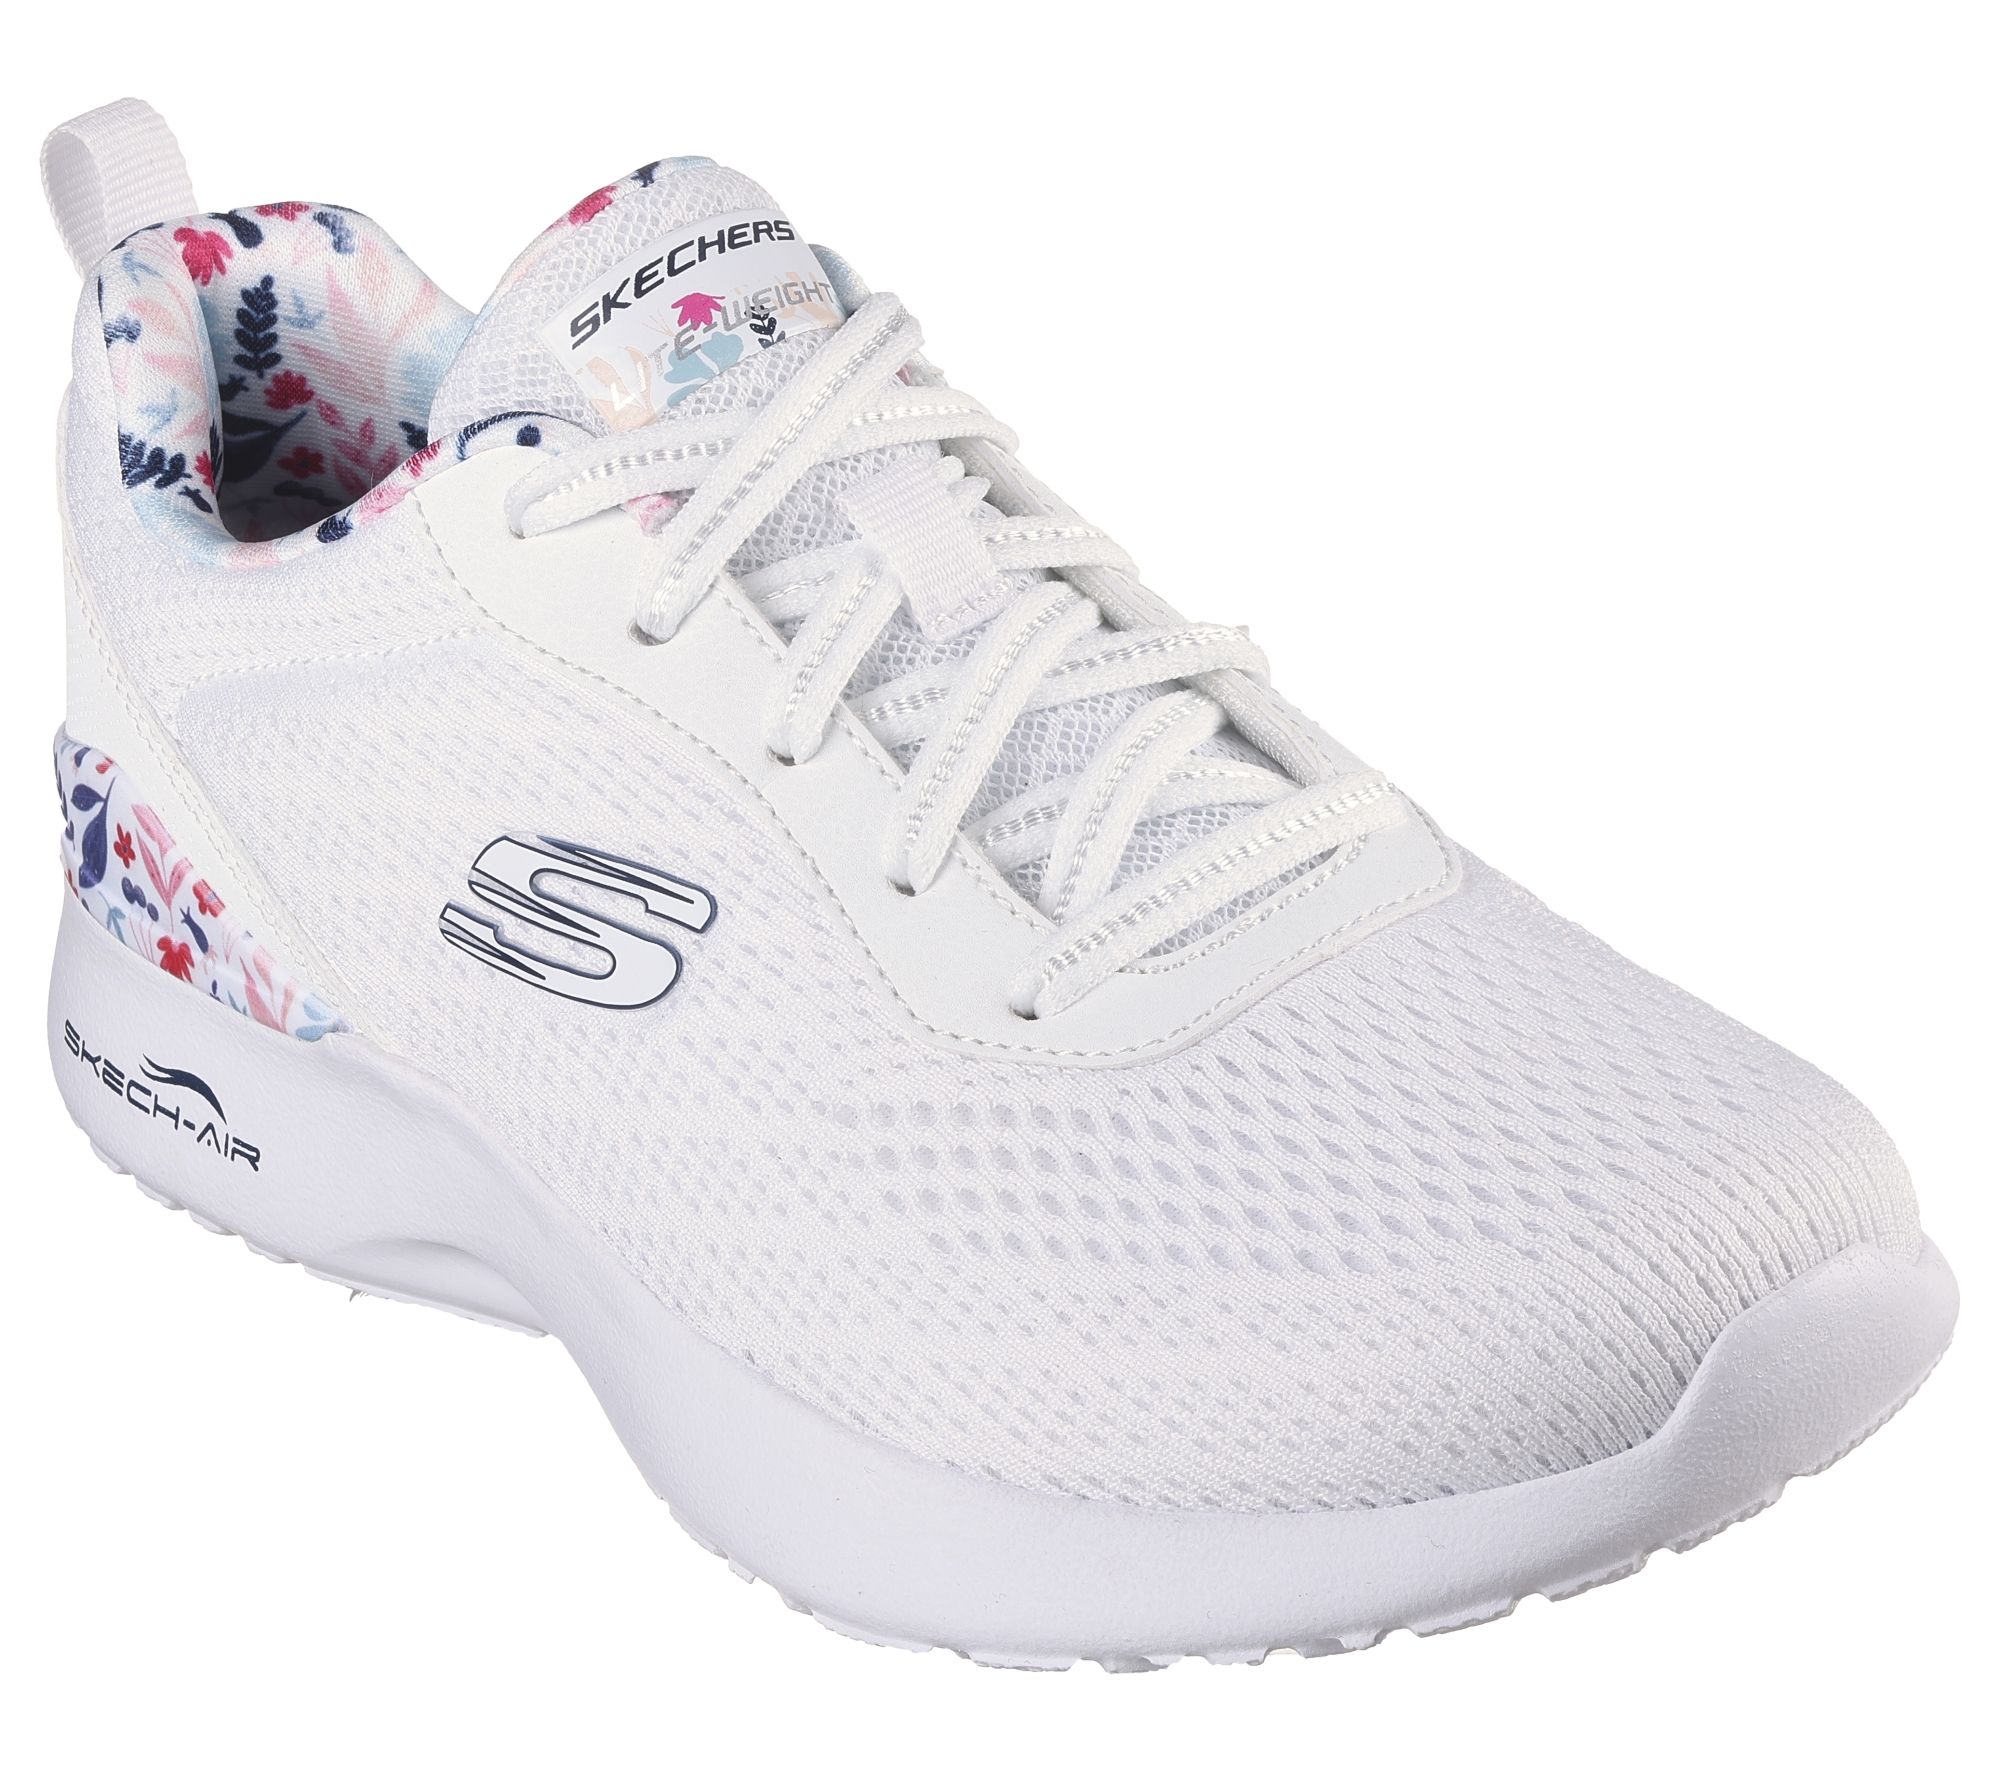 SKECHERS Skech-Air Dynamight -LAID OU 149756 WMLT